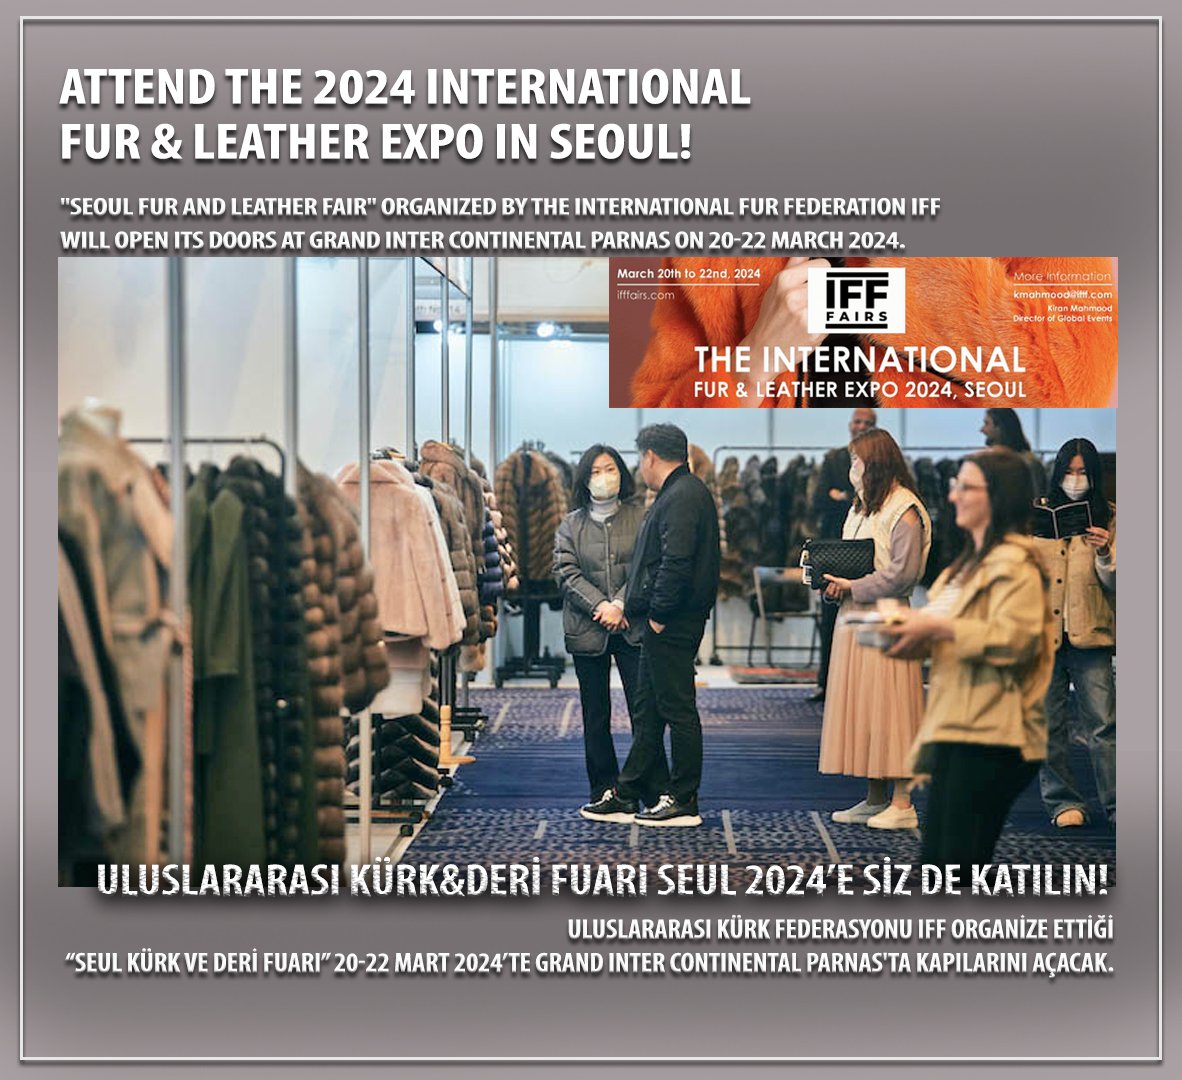 Attend The 2024 International FUR & LEATHER Expo In SEOUL! Magazine